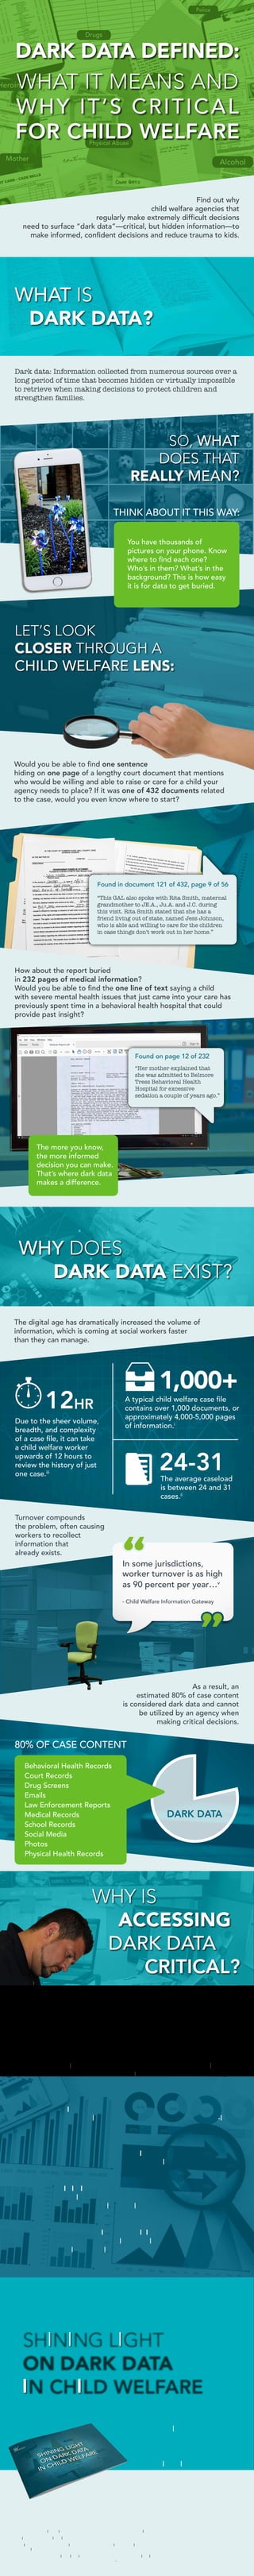 WHAT IS
	 DARK DATA?
Find out why
child welfare agencies that
regularly make extremely difficult decisions
need to surface “dark data”—critical, but hidden information—to
make informed, confident decisions and reduce trauma to kids.
Dark data: Information collected from numerous sources over a
long period of time that becomes hidden or virtually impossible
to retrieve when making decisions to protect children and
strengthen families.
SO, WHAT
DOES THAT
REALLY MEAN?
You have thousands of
pictures on your phone. Know
where to find each one?
Who’s in them? What’s in the
background? This is how easy
it is for data to get buried.
THINK ABOUT IT THIS WAY:
LET’S LOOK
CLOSER THROUGH A
CHILD WELFARE LENS:
How about the report buried
in 232 pages of medical information?
Would you be able to find the one line of text saying a child
with severe mental health issues that just came into your care has
previously spent time in a behavioral health hospital that could
provide past insight?
Would you be able to find one sentence
hiding on one page of a lengthy court document that mentions
who would be willing and able to raise or care for a child your
agency needs to place? If it was one of 432 documents related
to the case, would you even know where to start?
The more you know,
the more informed
decision you can make.
That’s where dark data
makes a difference.
WHY DOES
DARK DATA EXIST?
The digital age has dramatically increased the volume of
information, which is coming at social workers faster
than they can manage.
The average caseload
is between 24 and 31
cases.ii
Due to the sheer volume,
breadth, and complexity
of a case file, it can take
a child welfare worker
upwards of 12 hours to
review the history of just
one case.iii
A typical child welfare case file
contains over 1,000 documents, or
approximately 4,000-5,000 pages
of information.i
In some jurisdictions,
worker turnover is as high
as 90 percent per year…v
- Child Welfare Information Gateway
As a result, an
estimated 80% of case content
is considered dark data and cannot
be utilized by an agency when
making critical decisions.
Turnover compounds
the problem, often causing
workers to recollect
information that
already exists.
80% OF CASE CONTENT
Behavioral Health Records
Court Records
Drug Screens
Emails
Law Enforcement Reports
Medical Records
School Records
Social Media
Photos
Physical Health Records
WHY IS
	 ACCESSING
DARK DATA 			
	 CRITICAL?
SHINING LIGHT
ON DARK DATA
IN CHILD WELFARE
If an agency can capture, process, and analyze dark
data in real time, many things can happen:
BUILD TRUST:
Spare families from repeating information and re-living
traumatic experiences
REDUCE TRAUMA TO KIDS:
Make the best decision for a child at every step
MINIMIZE DELAYS:
Quickly understand case themes or topics of concern
in order to apply critical thinking to major decisions
MAKE CONFIDENT DECISIONS:
Use intimate, detailed knowledge about the case,
family, and child to support major decisions
“Her mother explained that
she was admitted to Belmore
Tress Behavioral Health
Hospital for excessive
sedation a couple of years ago.”
“This GAL also spoke with Rita Smith, maternal
grandmother to JE.A., Ju.A. and J.C. during
this visit. Rita Smith stated that she has a
friend living out of state, named Jess Johnson,
who is able and willing to care for the children
in case things don't work out in her home.”
Download our eBook
for answers to more
common questions
around dark data in
child welfare:
teamnorthwoods.com/
darkdata
Sources
i.	 Jacob Meetze, Intake Investigator, Beaufort County Department of Social Services
ii.	 Interviews with child welfare workers
iii.	 “If You’re Right for the Job, It’s the Best Job in the World,” National Association of
Social Workers, June 2004 at p. 15.
iv.	 “Worker Turnover,” Child Welfare Information Gateway, https://www.childwelfare.
gov/topics/management/workforce/retention/workforce-retention/turnover/
teamnorthwoods.com
DARK DATA
Found on page 12 of 232
Found in document 121 of 432, page 9 of 56
 